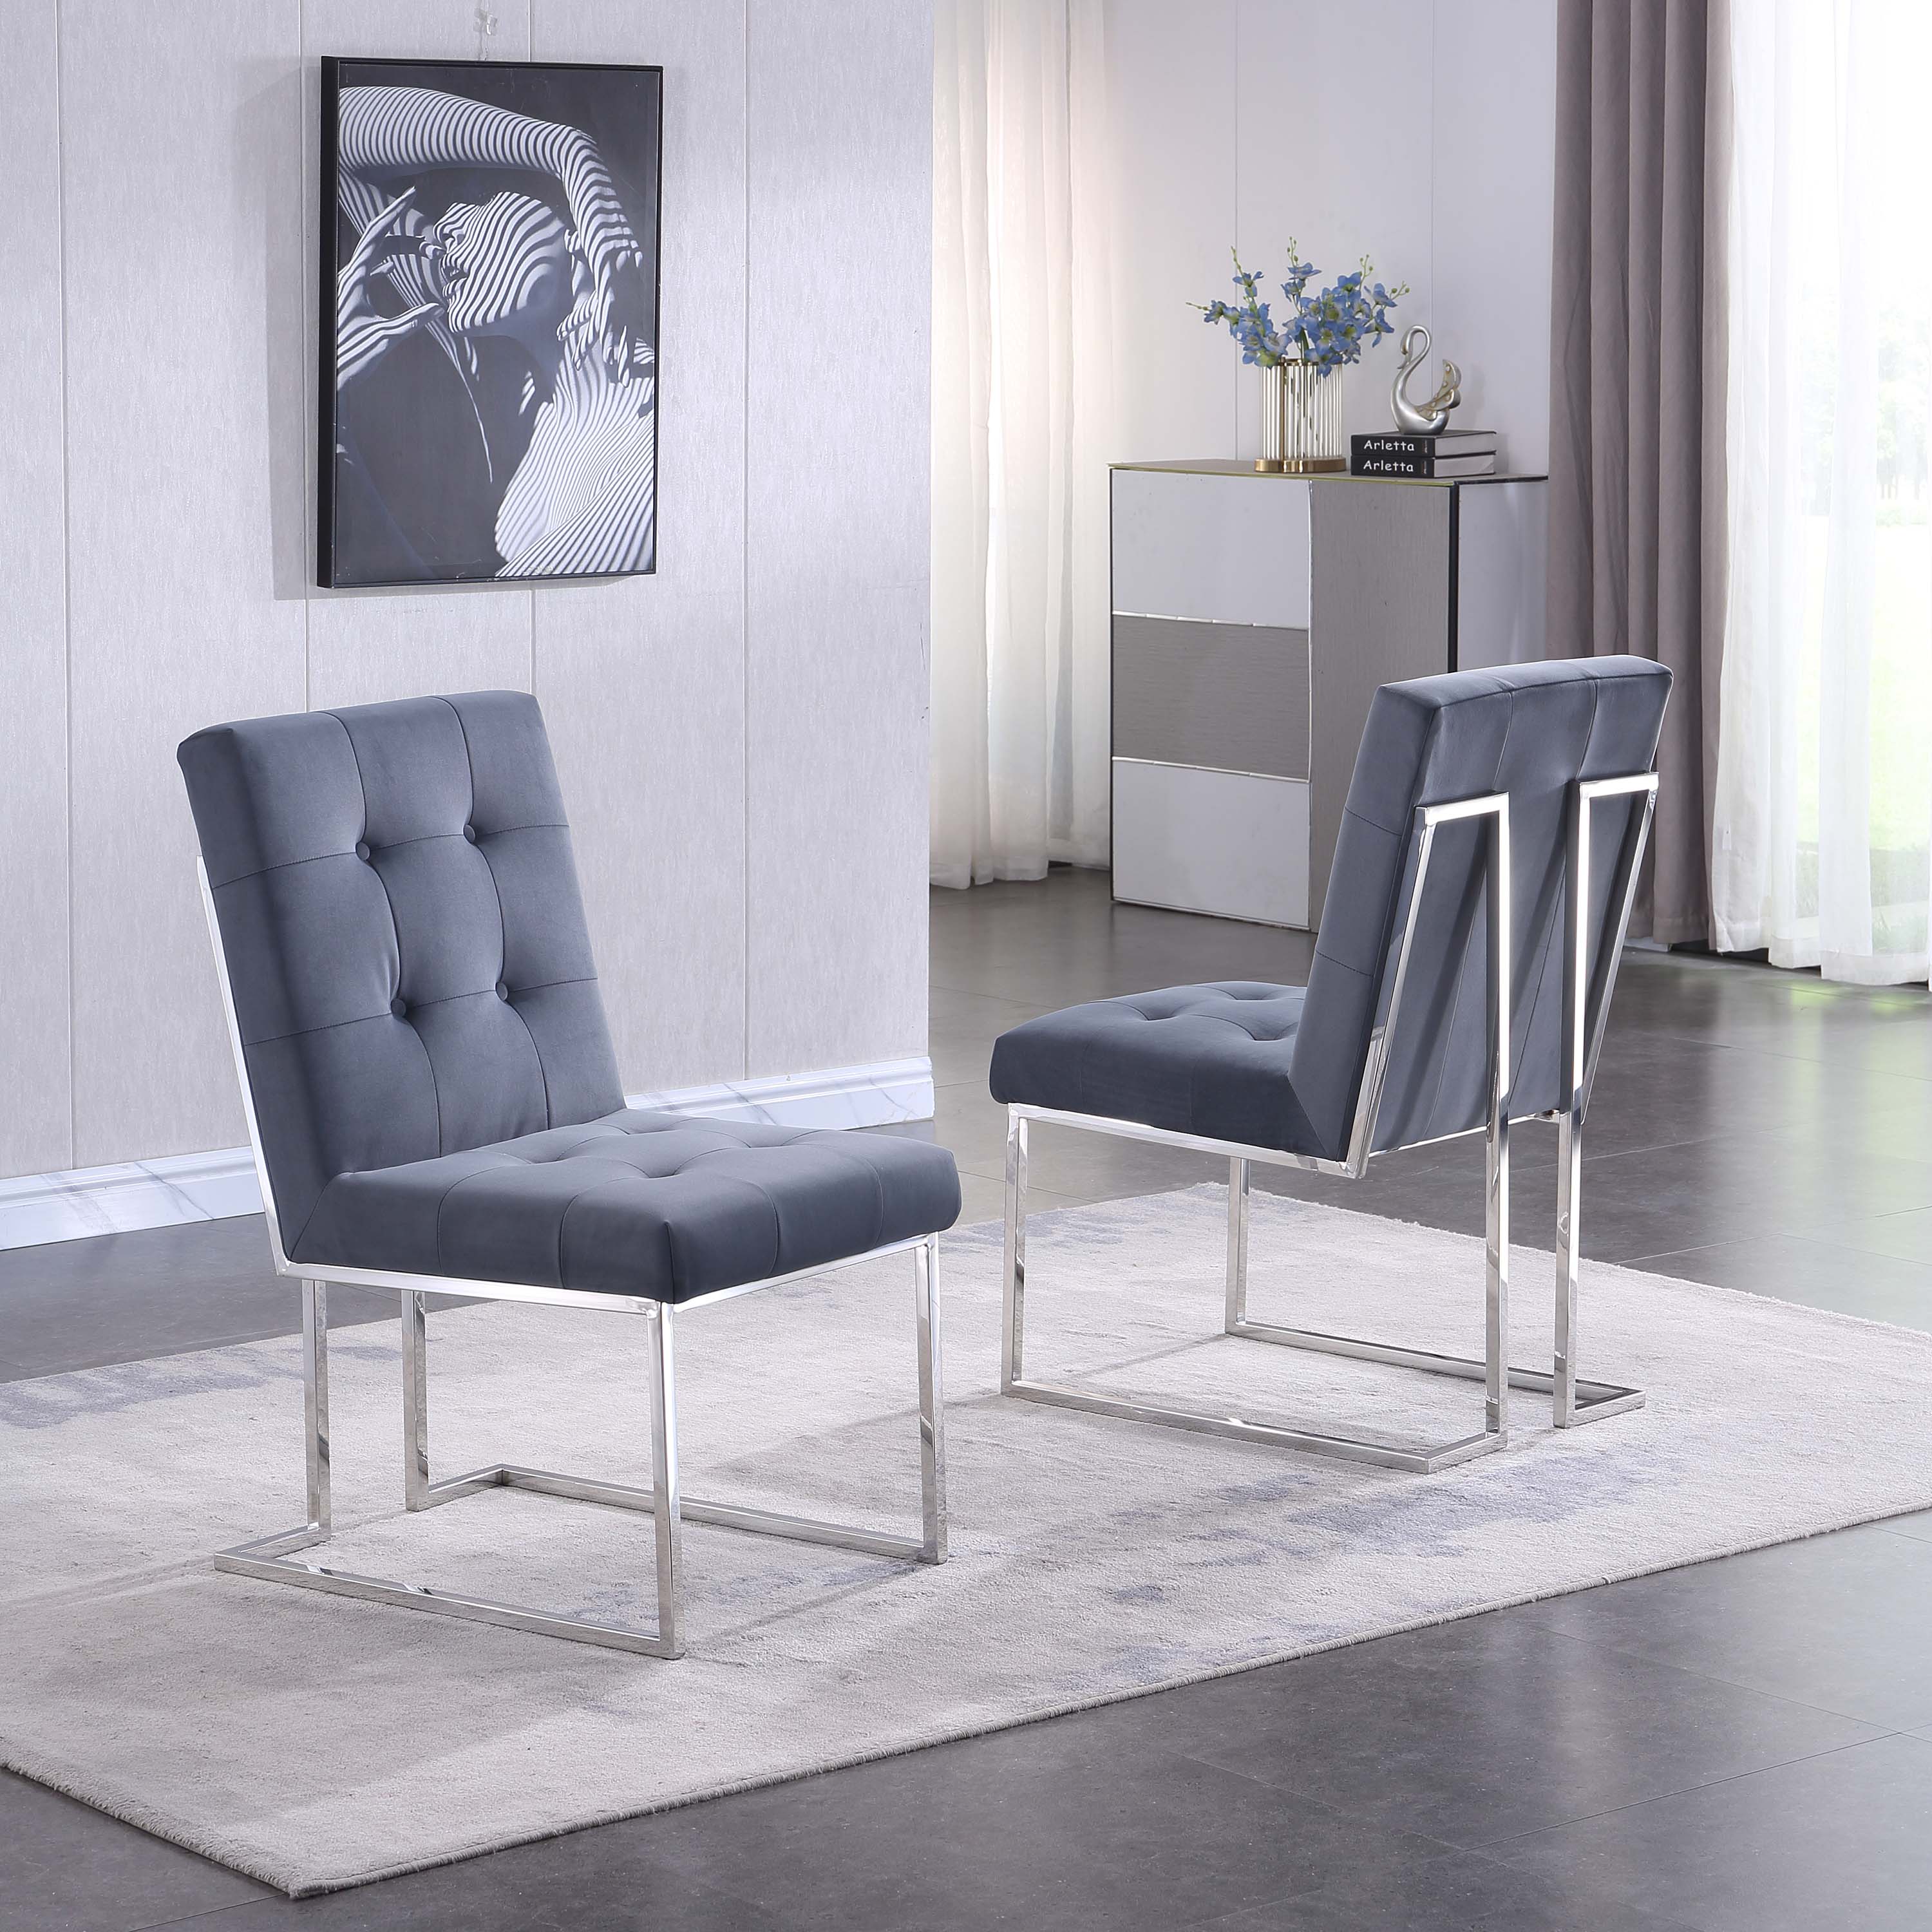 Chesmore Dining Chair Grey Set of 2